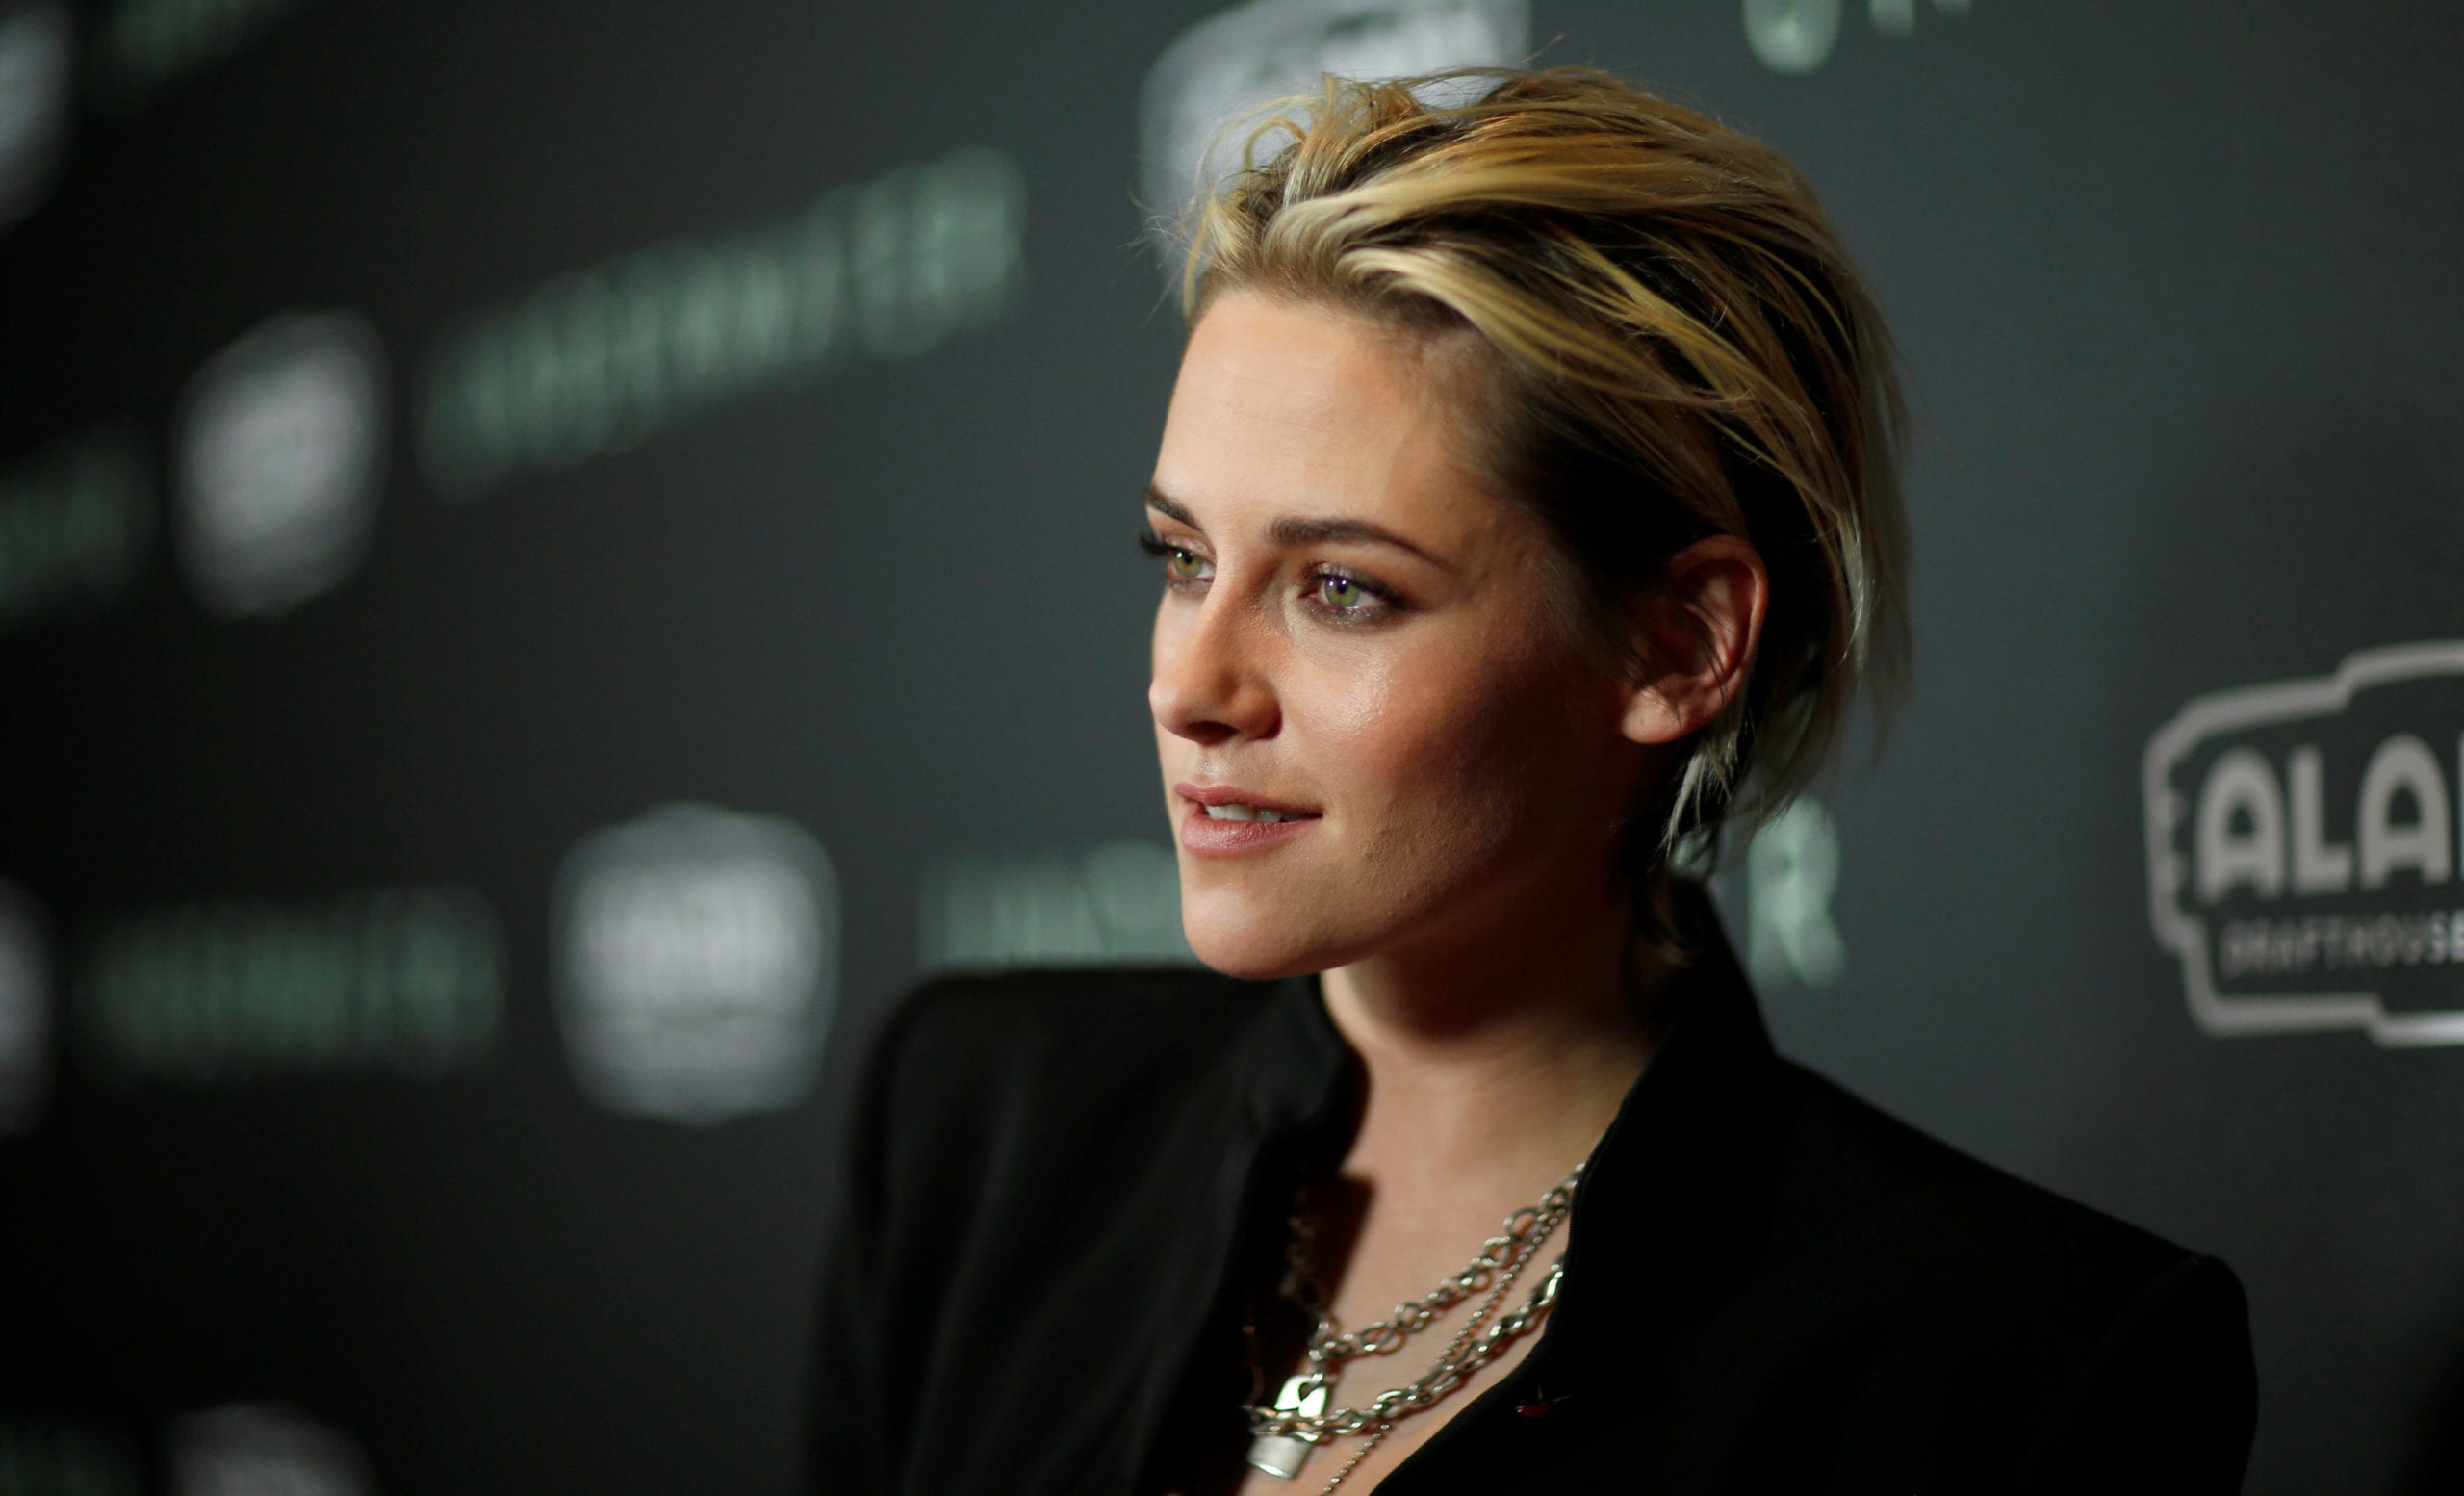 FILE PHOTO: Cast member Kristen Stewart poses at a screening for the film "Underwater" in Los Angeles, California, U.S., January 7, 2020. REUTERS/Mario Anzuoni/File Photo